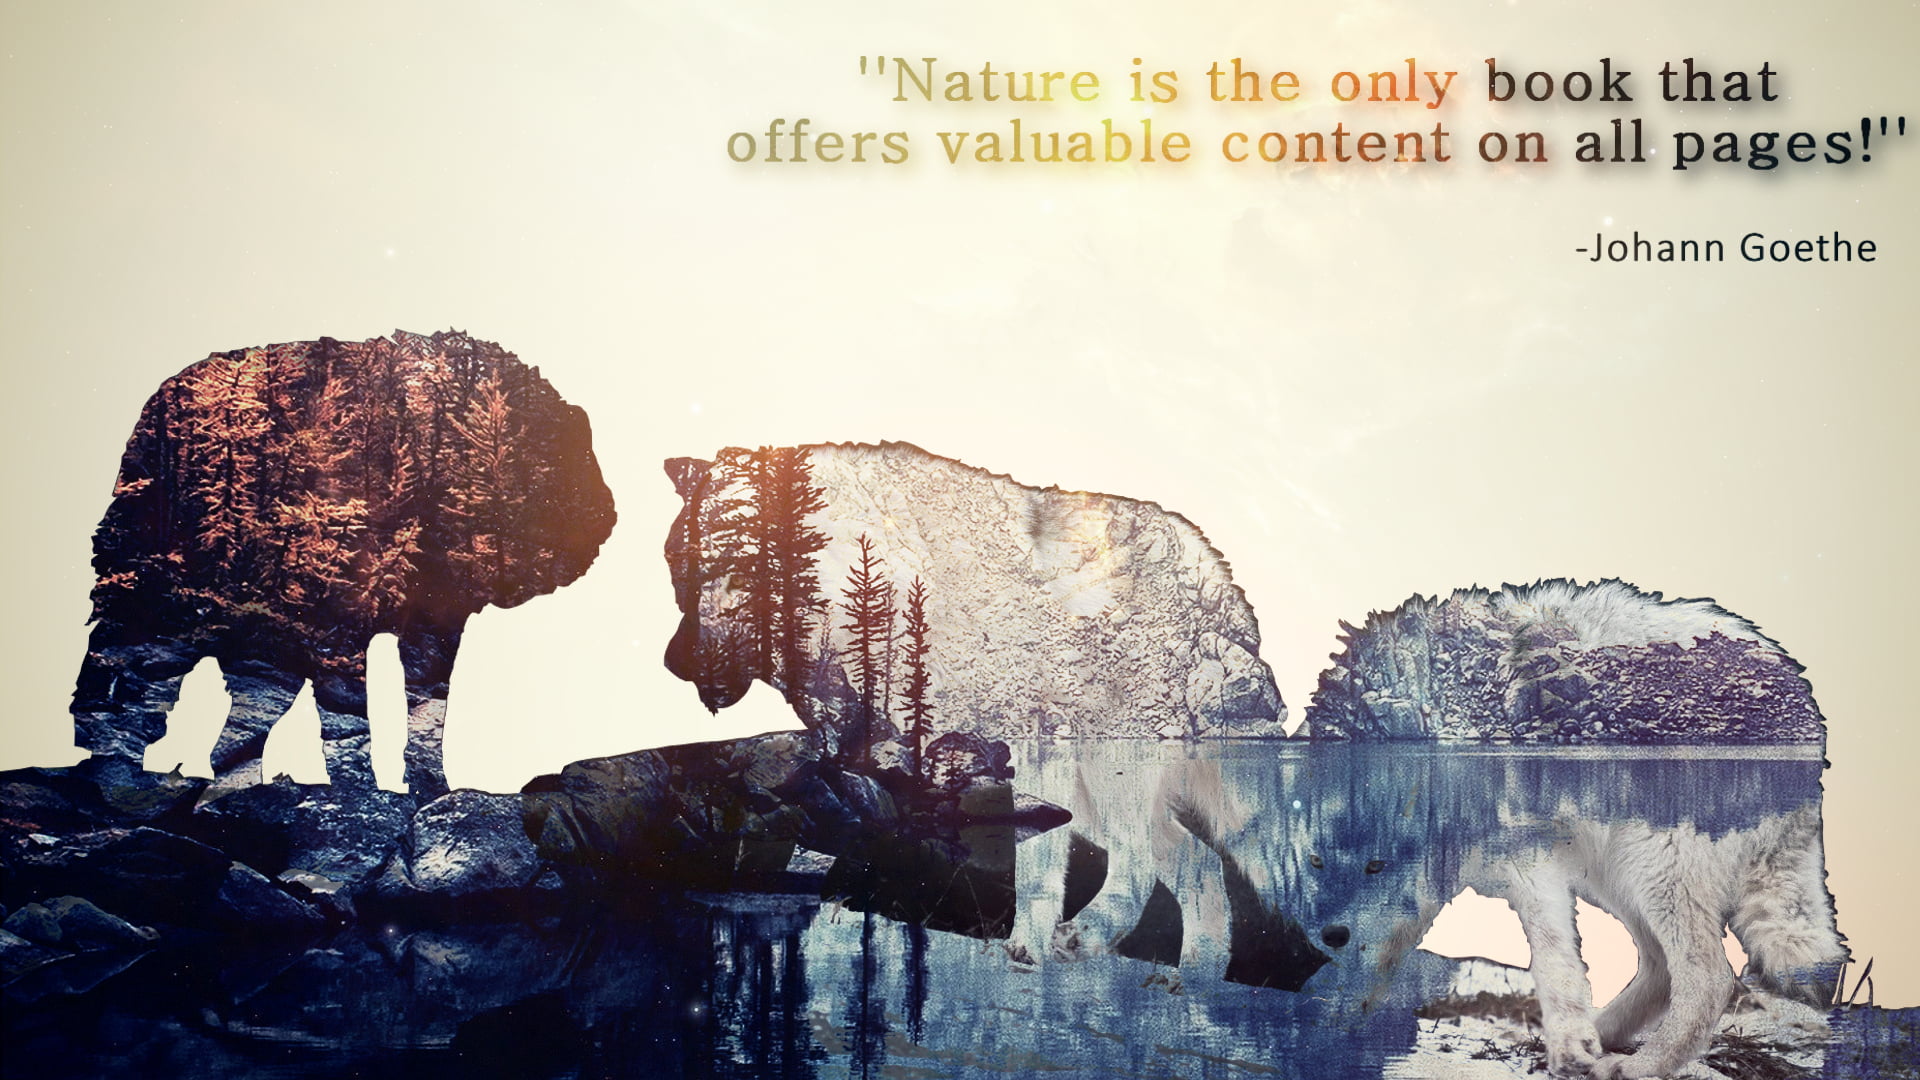 nature is the only book that offers valuable content on all pages by Johann Goethe text, nature, wolf, landscape, digital art